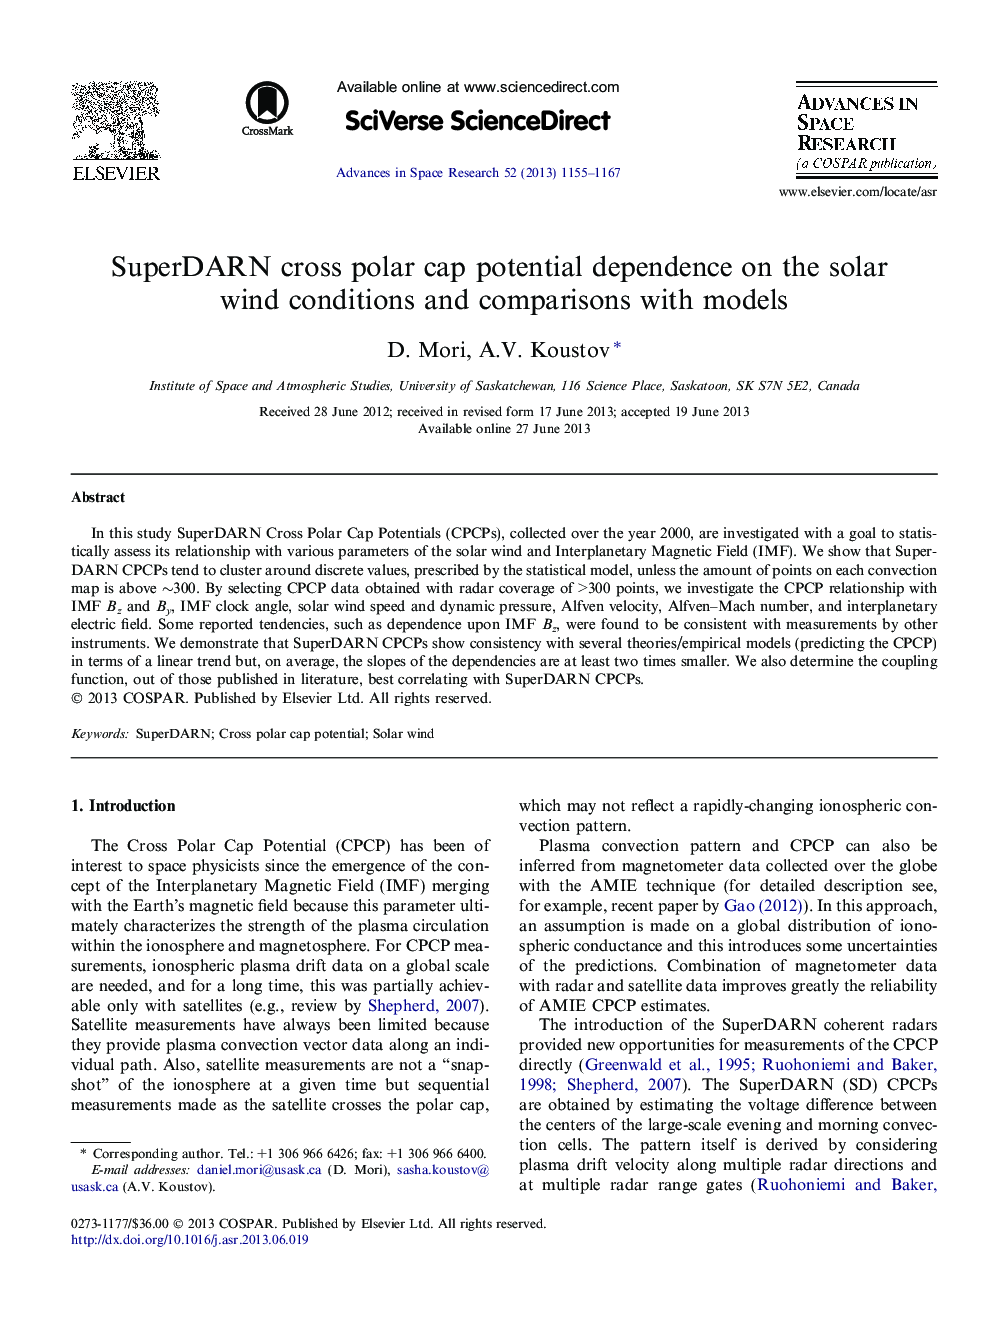 SuperDARN cross polar cap potential dependence on the solar wind conditions and comparisons with models